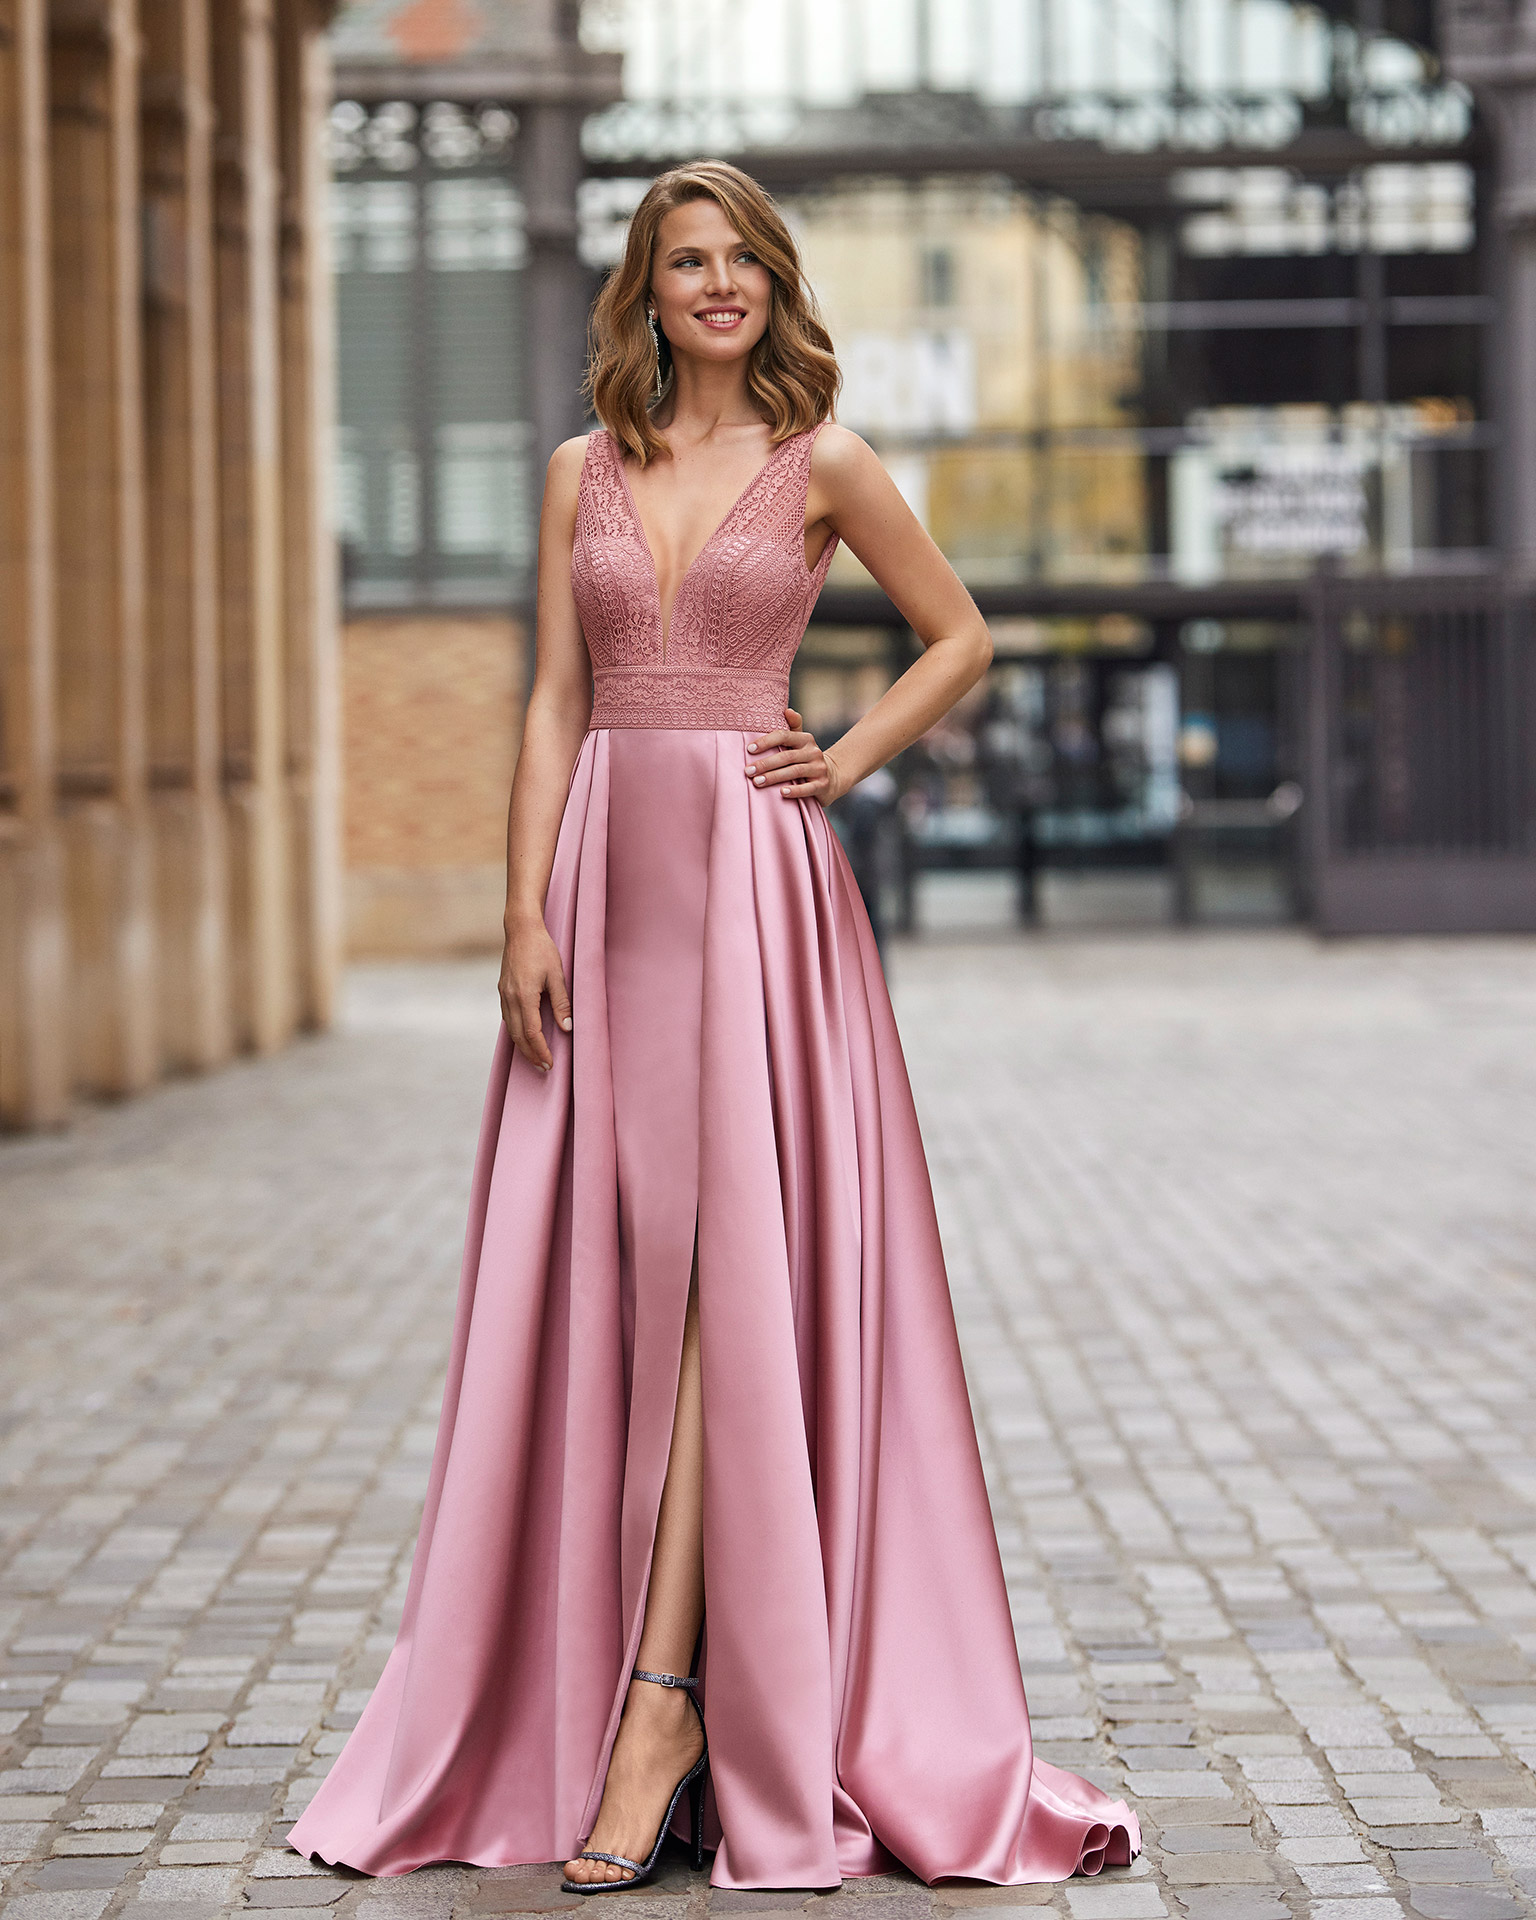 Long evening dress made of satin. Marfil Barcelona design with a lace bodice, a V-neckline, and a pleated skirt with a slit. MARFIL_BARCELONA.